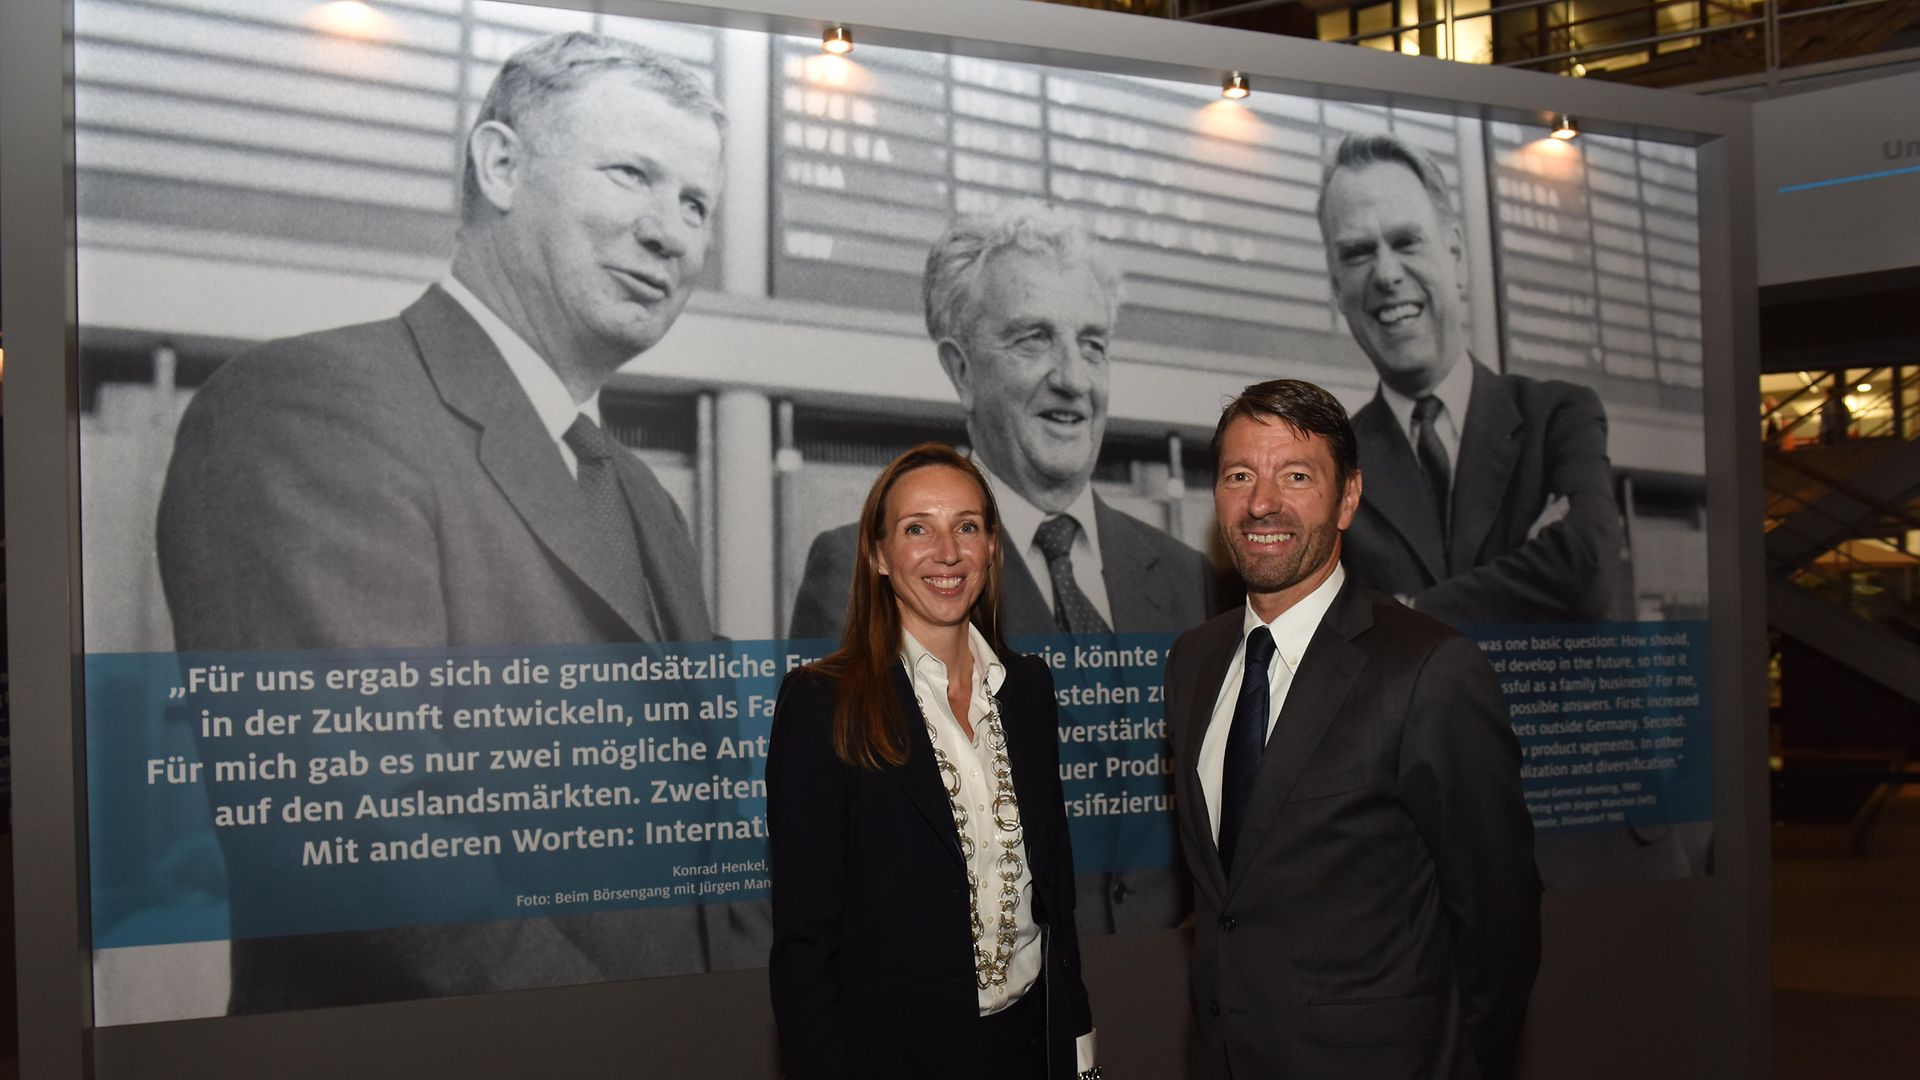 

Dr. Konrad Henkel, grandson of the company's founder Fritz Henkel, was born 100 years ago on October 25. At the exhibition opening: Dr. Simone Bagel-Trah, Chairwoman of the Shareholders’ Committee and the Supervisory Board, and Henkel CEO Kasper Rorsted.